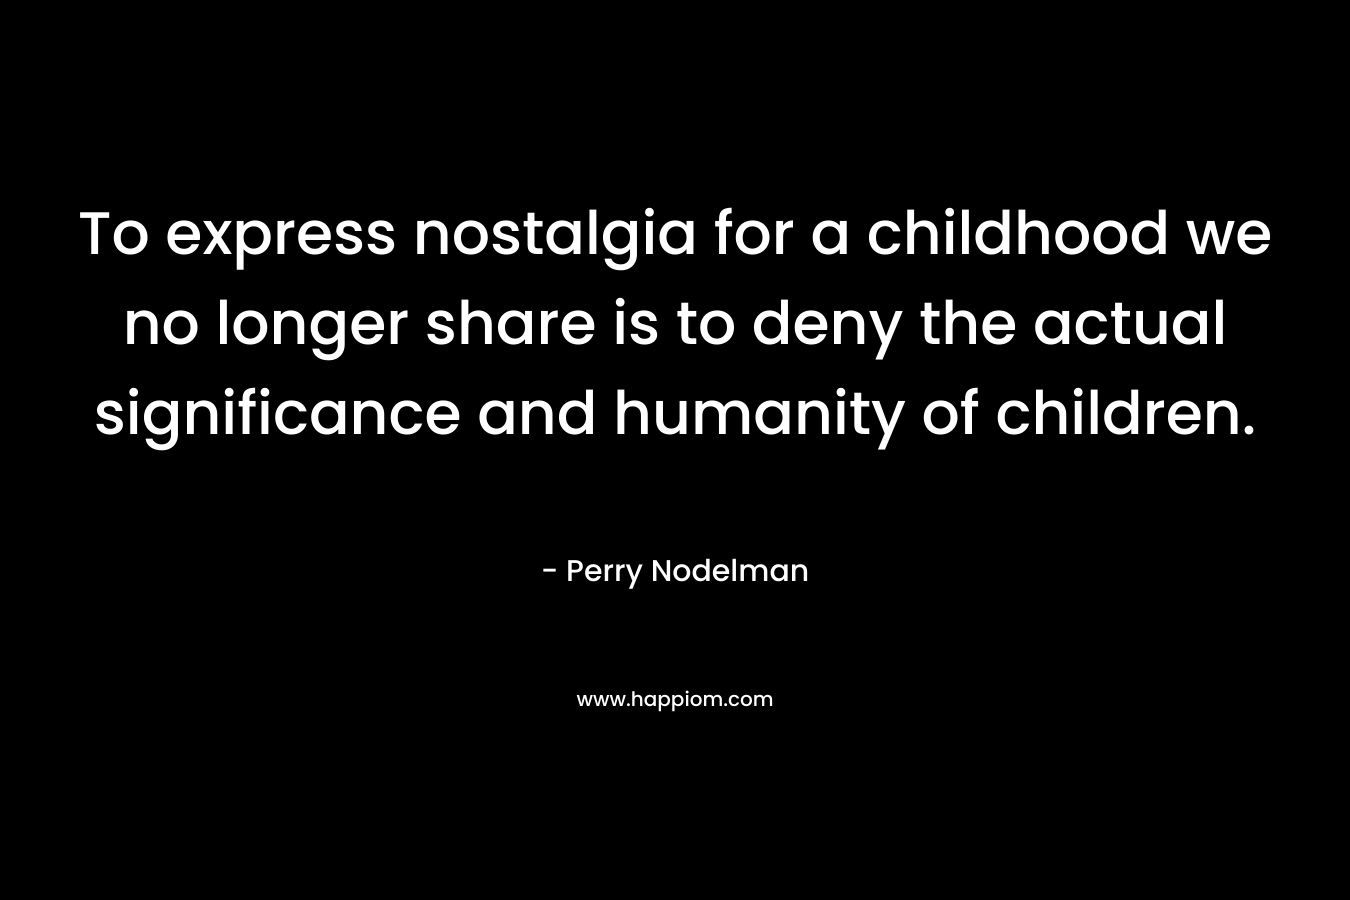 To express nostalgia for a childhood we no longer share is to deny the actual significance and humanity of children. – Perry Nodelman